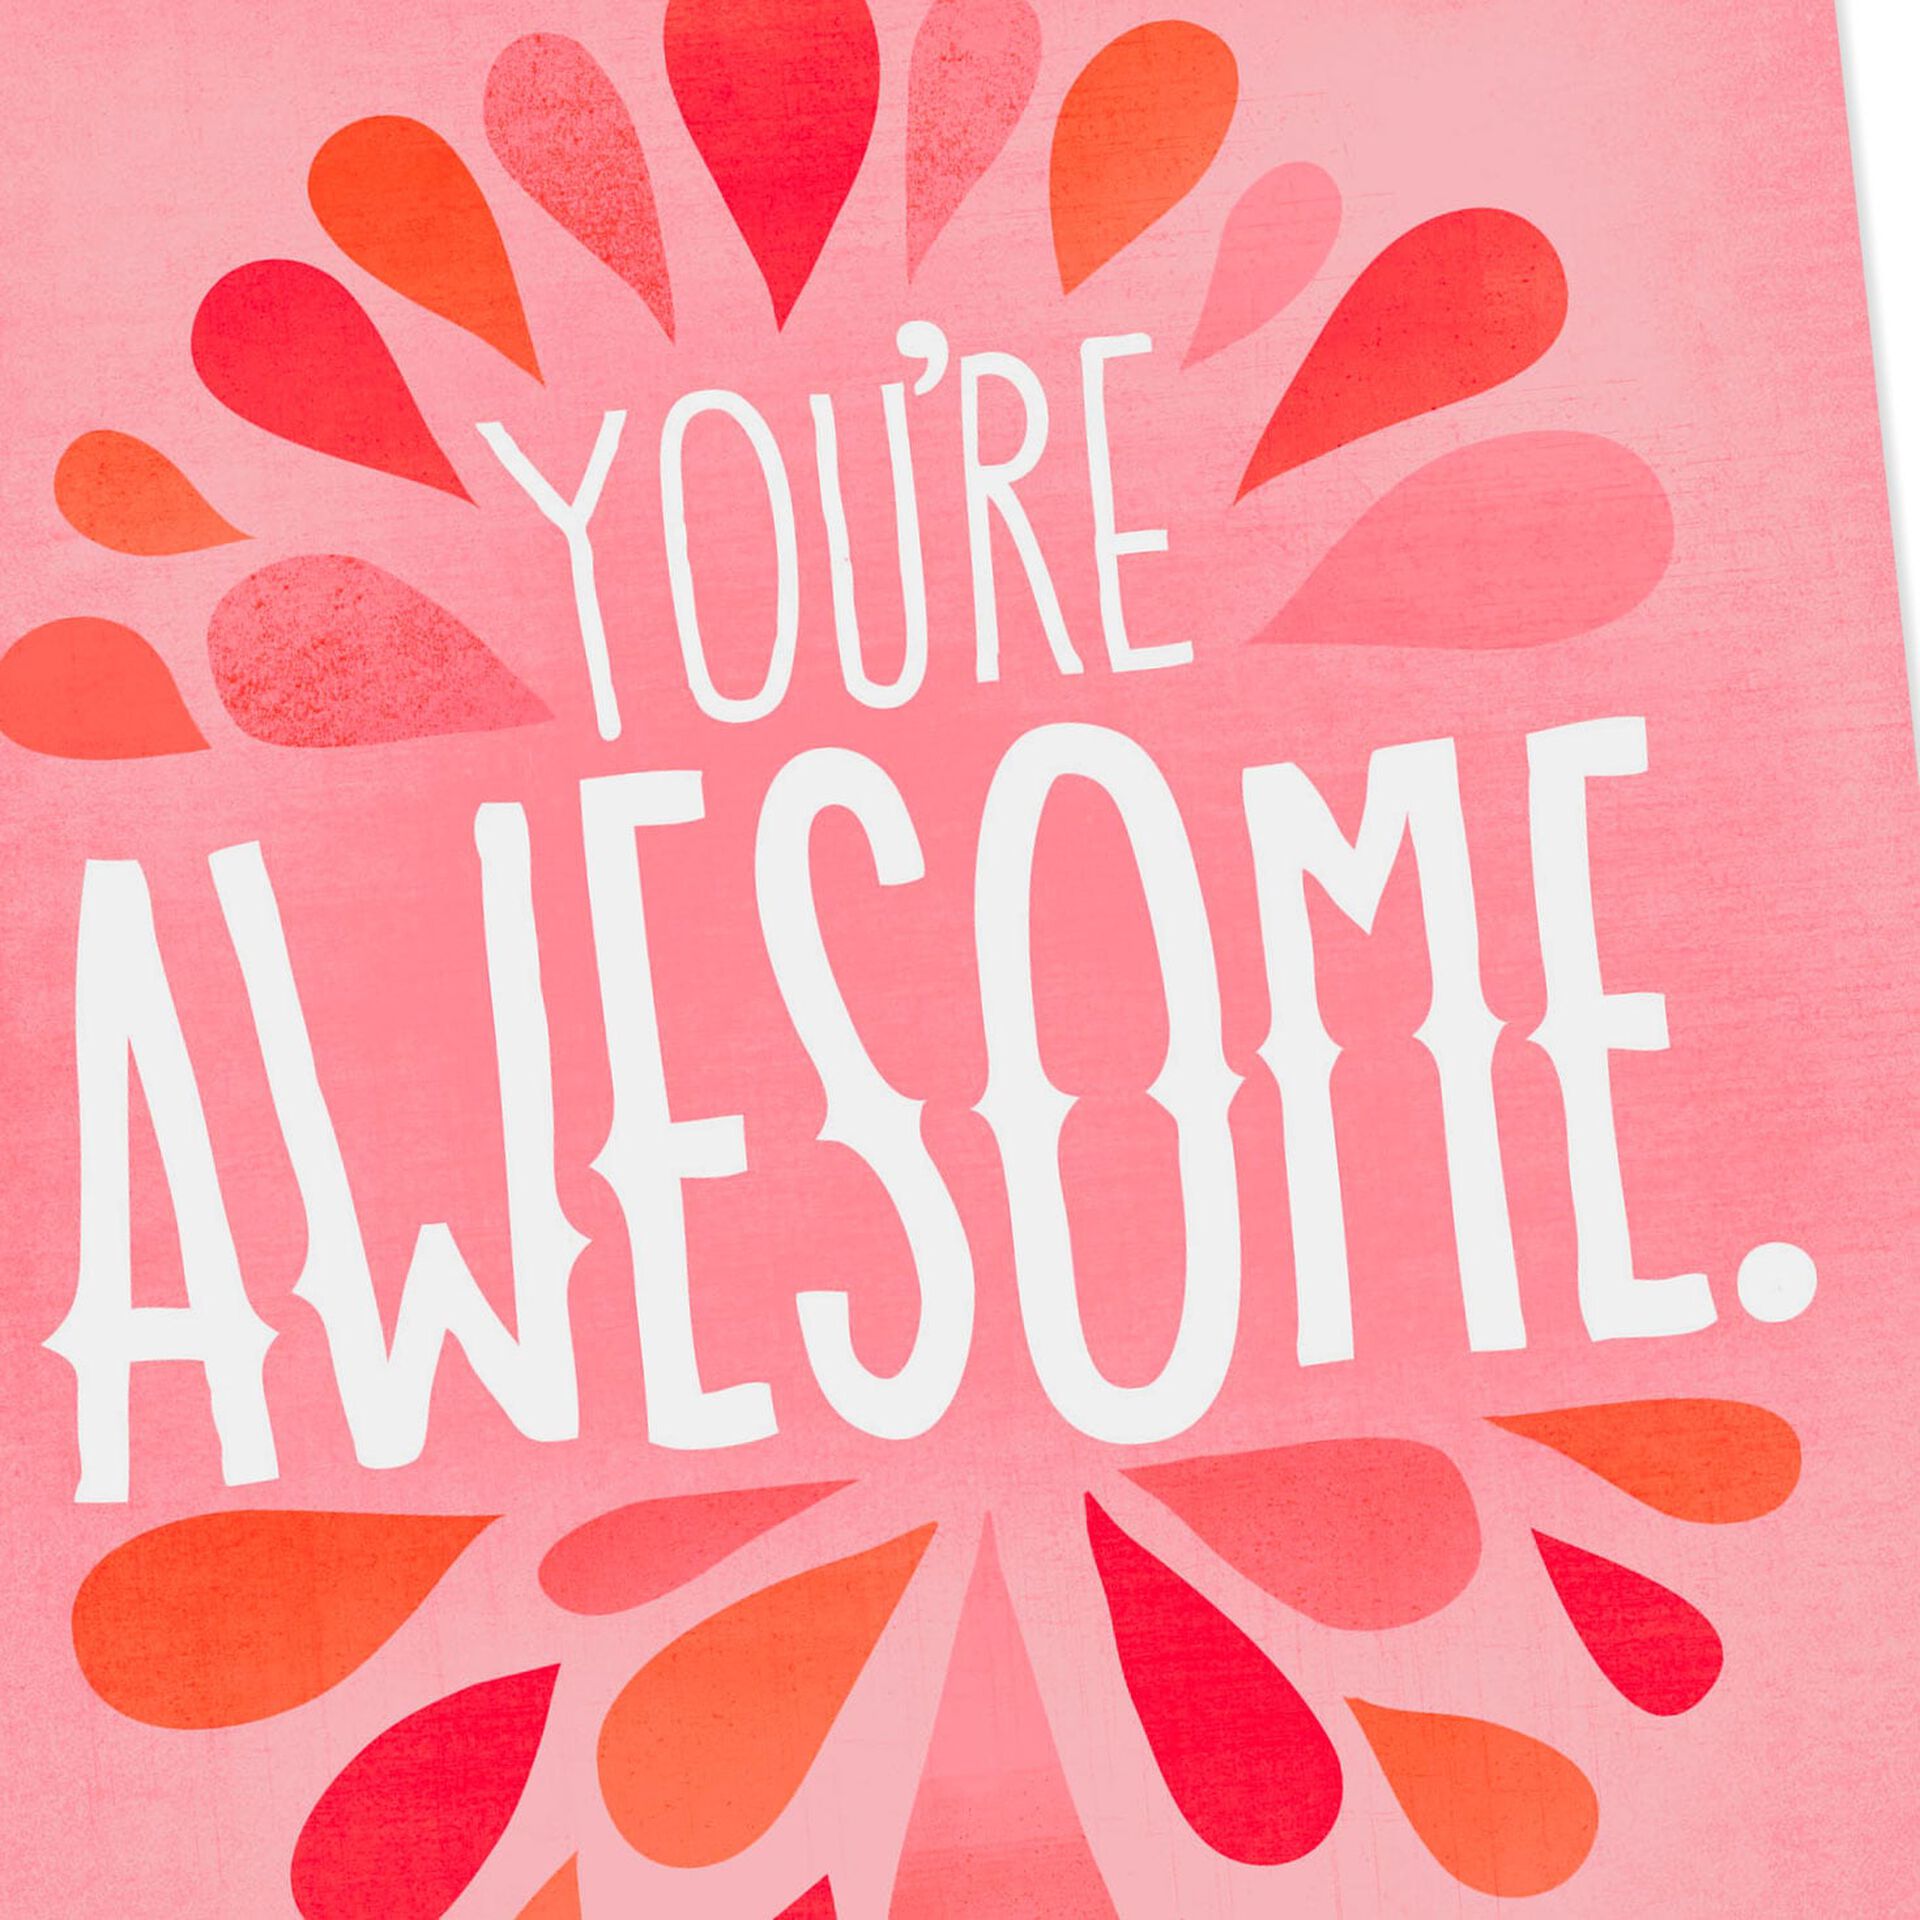 I Think You're Awesome Card - Greeting Cards - Hallmark